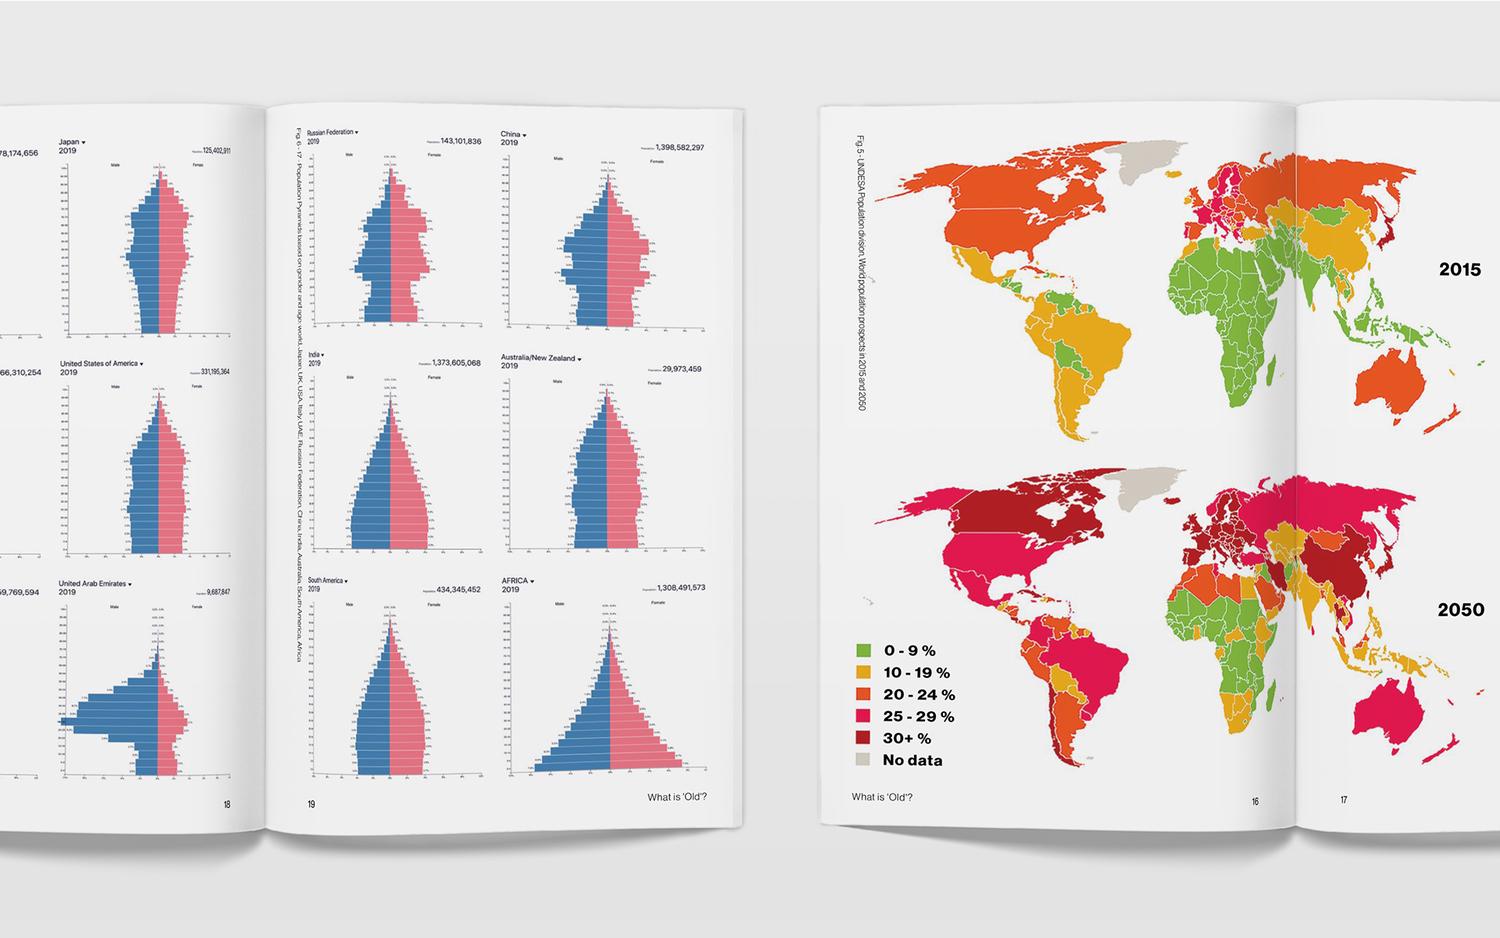 How to take care of the old – Book spread representing the world ageing population diagrams between 2015 and 2050